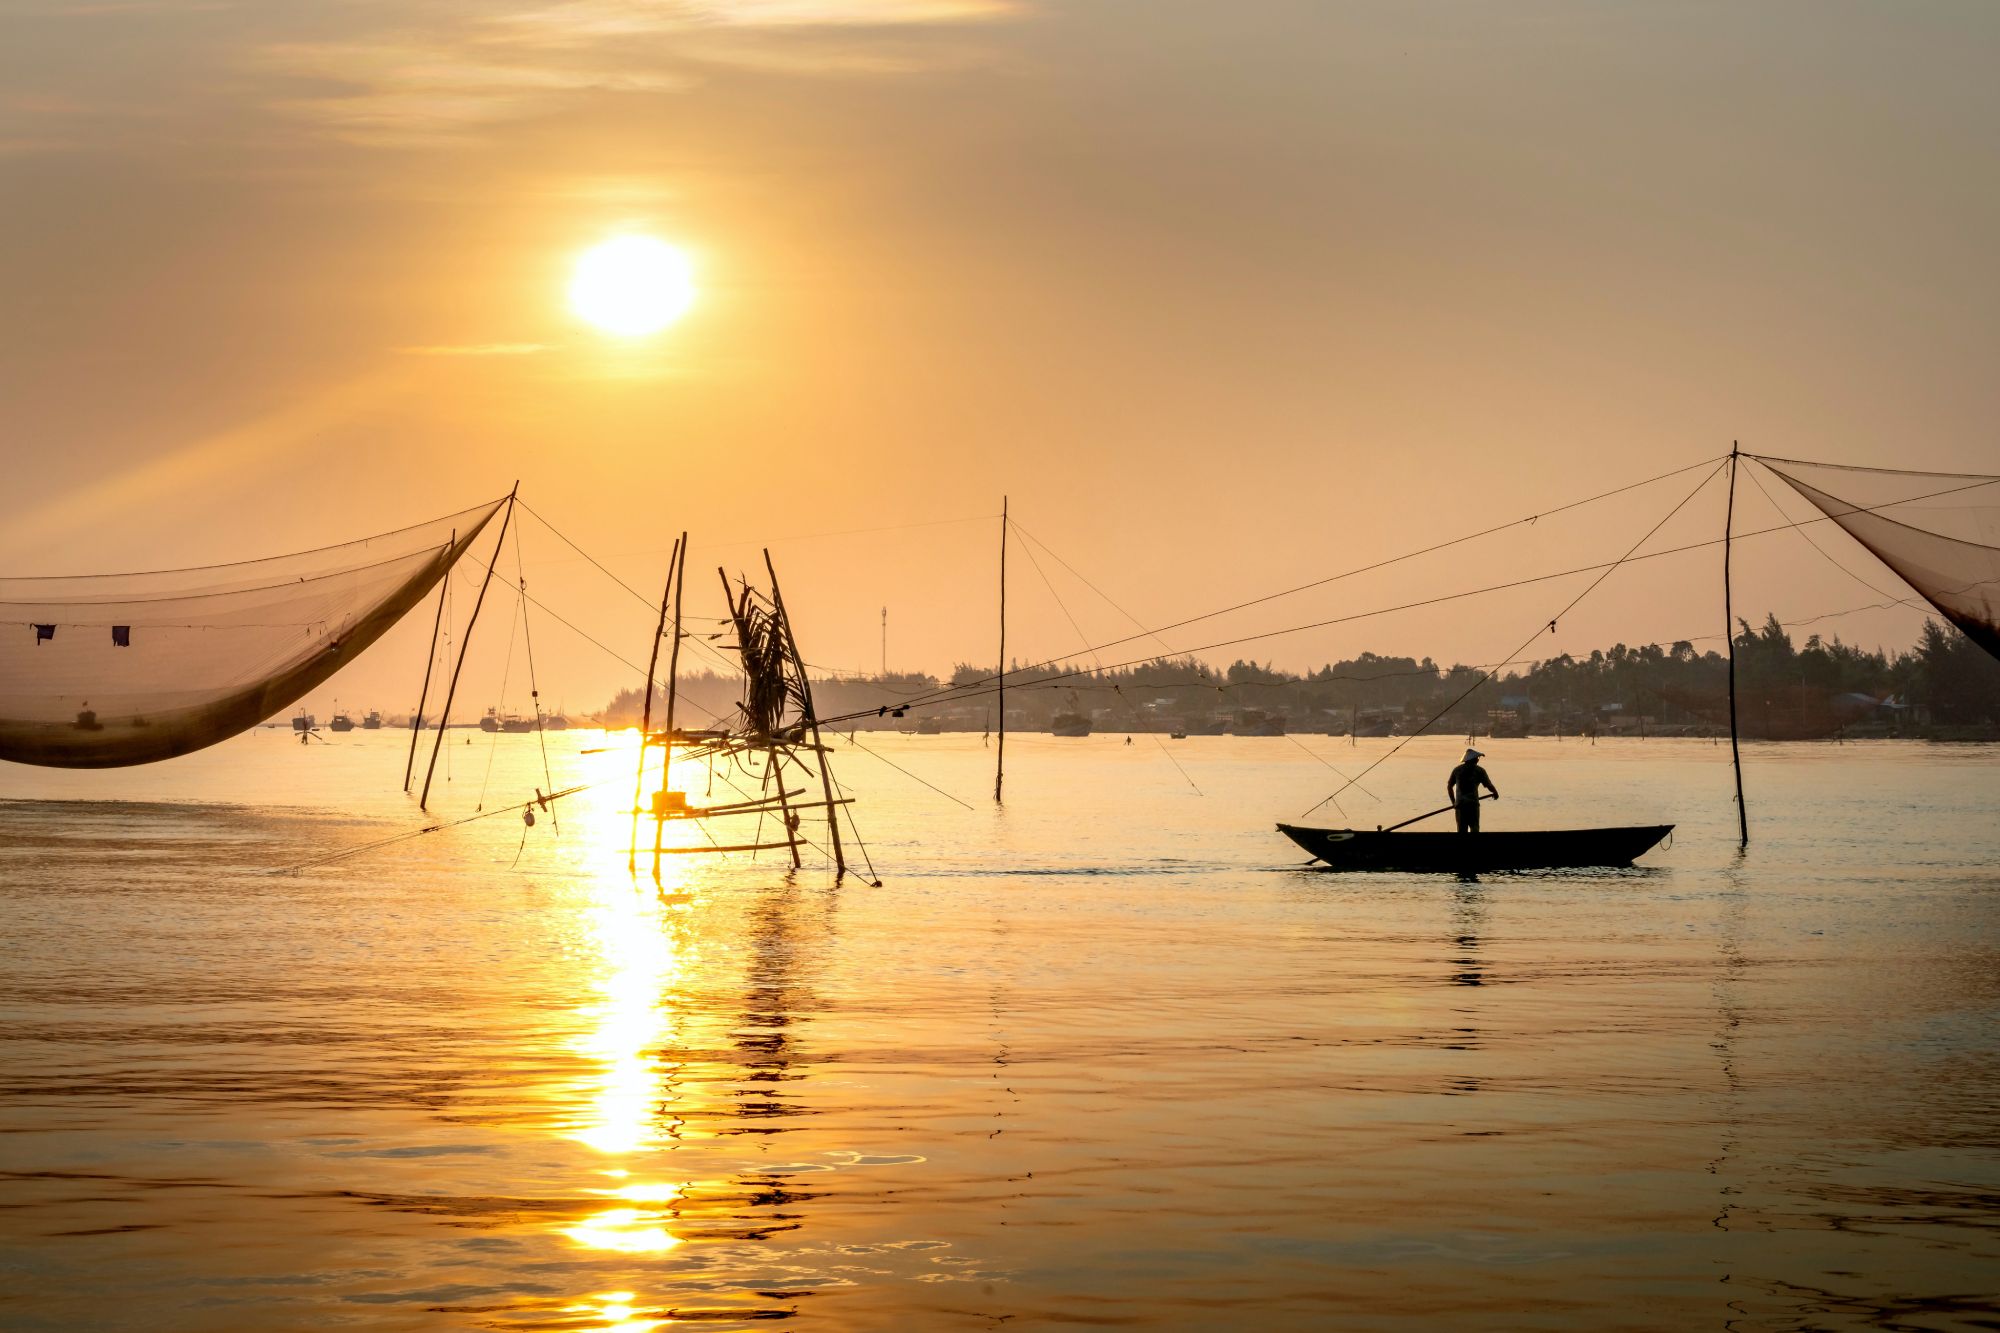 Person fishing on a boat at sunset; bamboo fishing poles